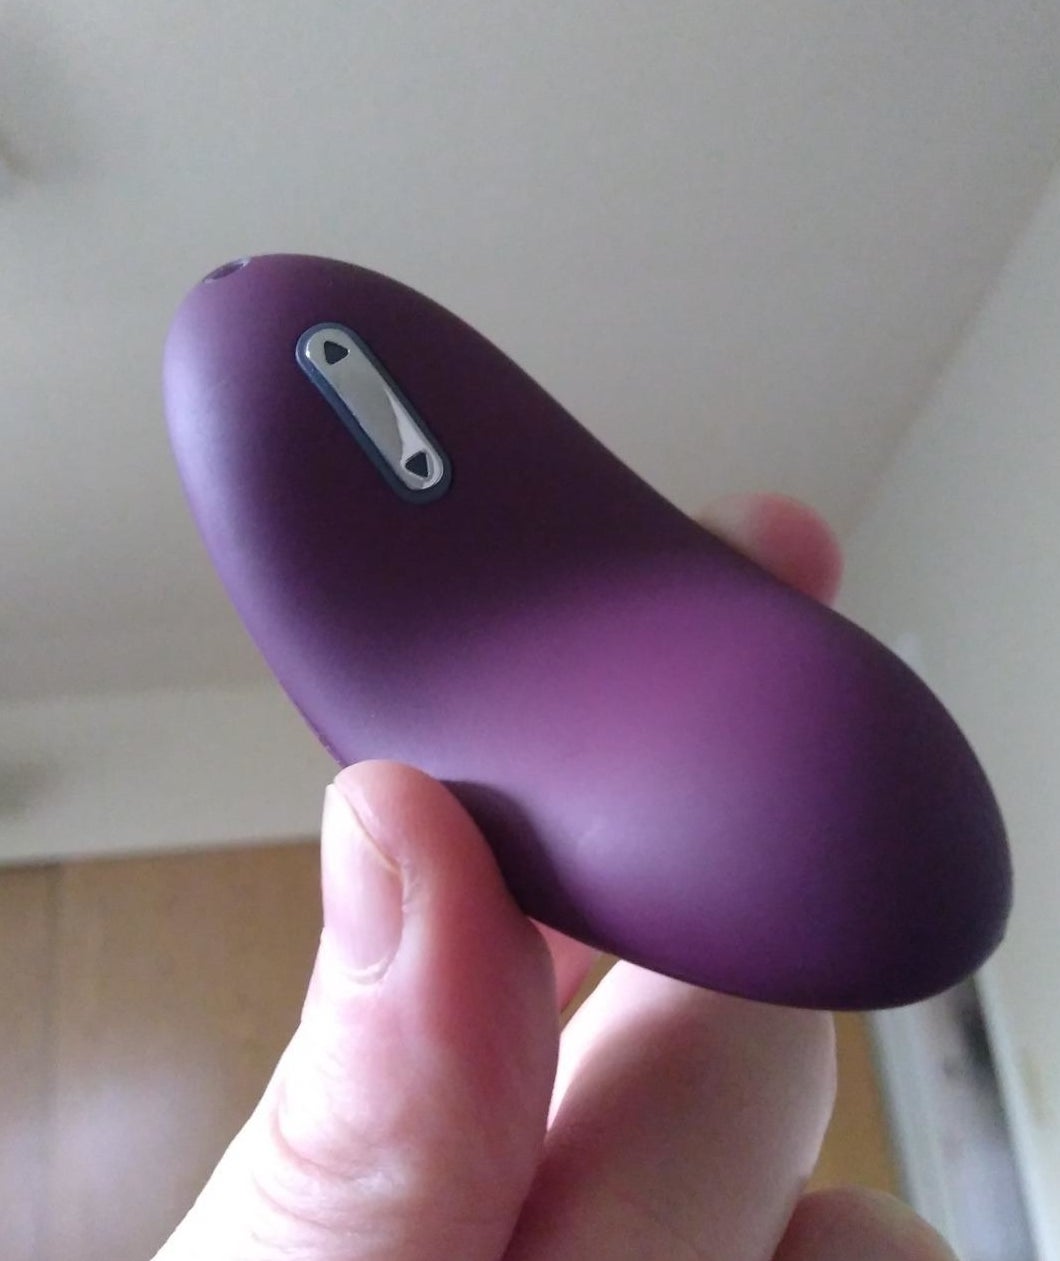 reviewer holding the Svakom vibrator in purple